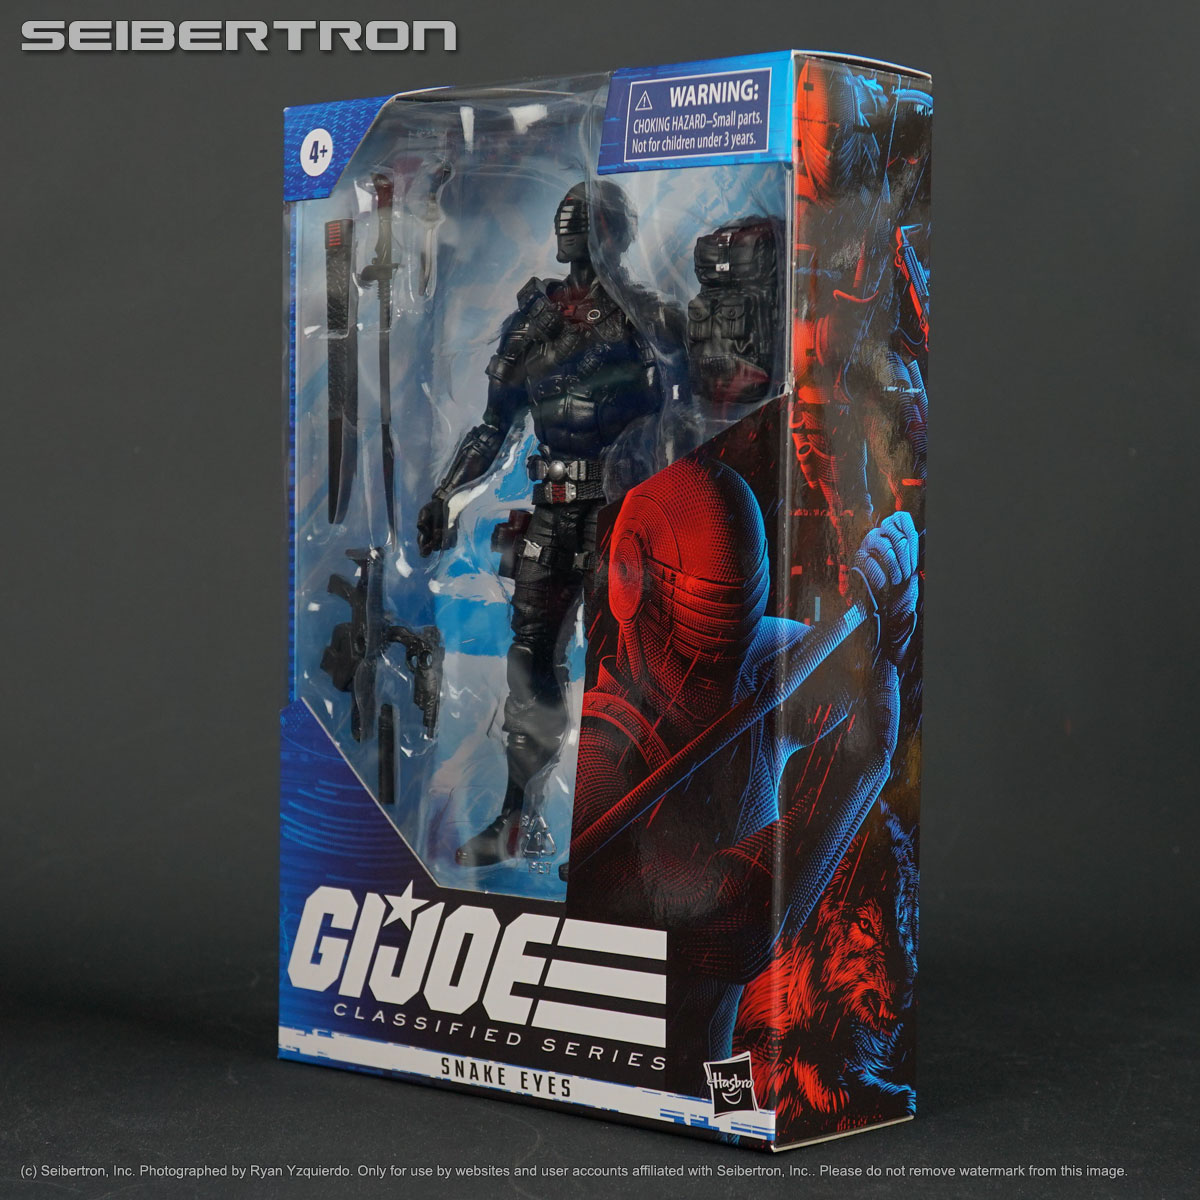 Transformers toys, Comic Books, BotBots, Masters of the Universe, Teenage Mutant Ninja Turtles, Gobots, and other listings from Seibertron.com: GI Joe Classified Series SNAKE EYES 6